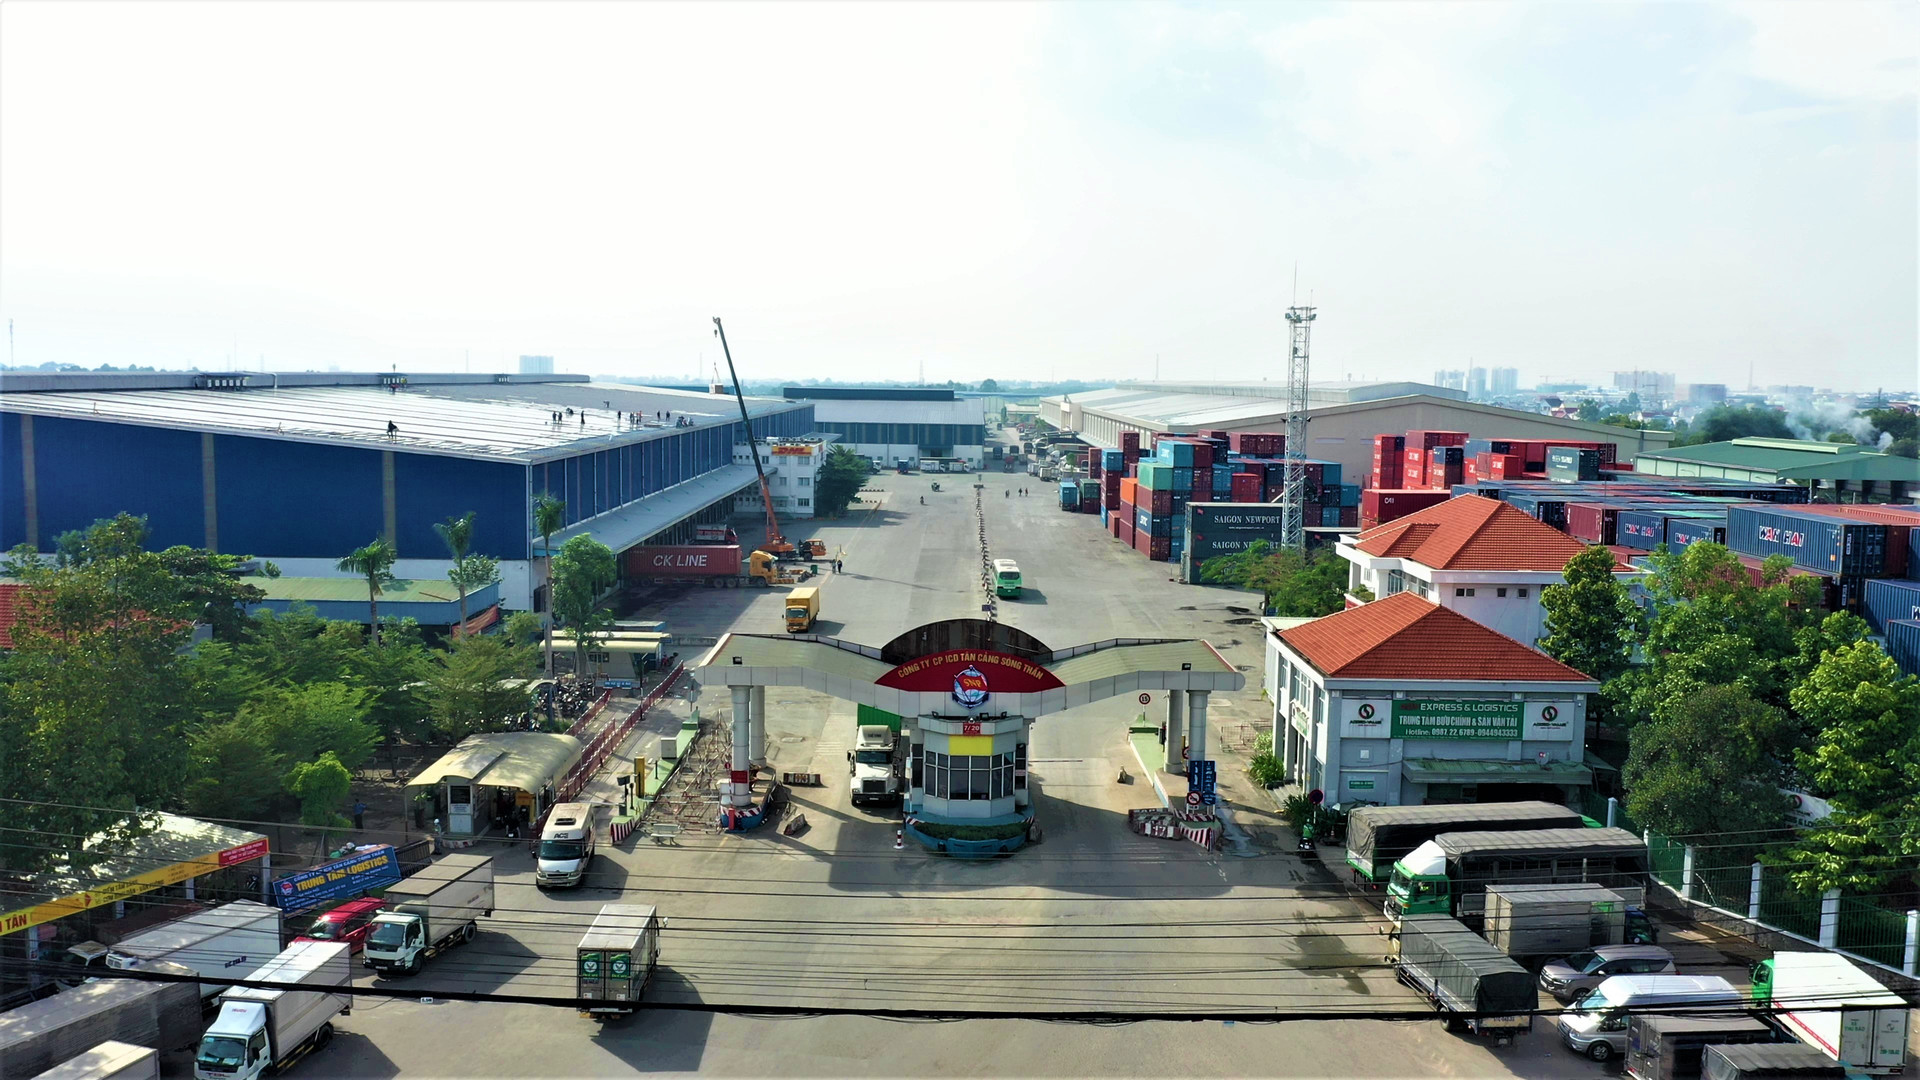 ICD Tan Cang Song Than became a logistics complex center providing various forms of services as warehouses, delivery center, transport, and customs procedures